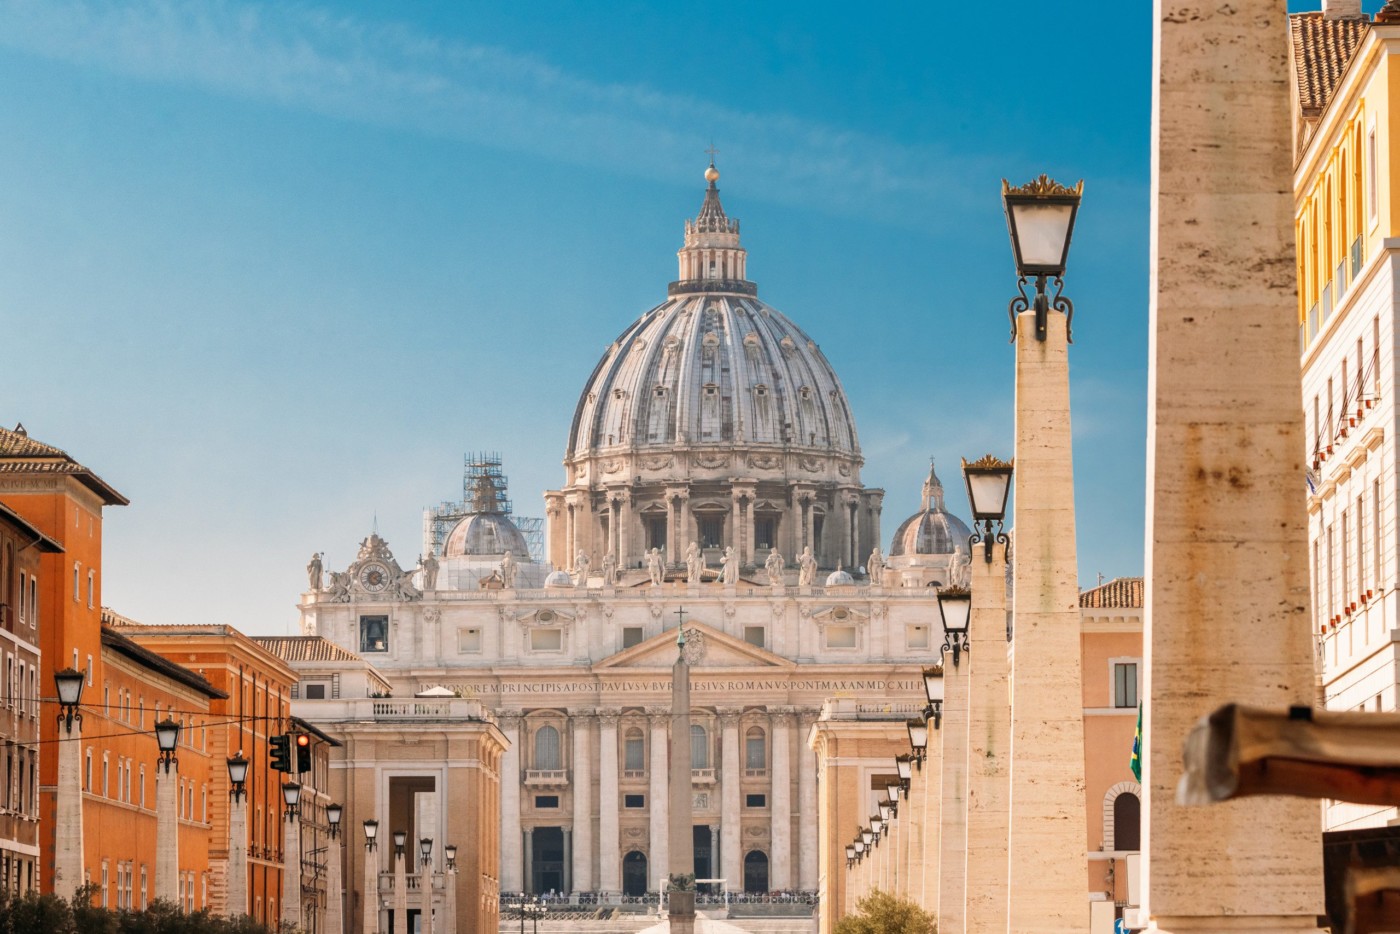 Vatican, Italy. St. Peter's Square With Papal Basilica Of St. Peter Near Rome.